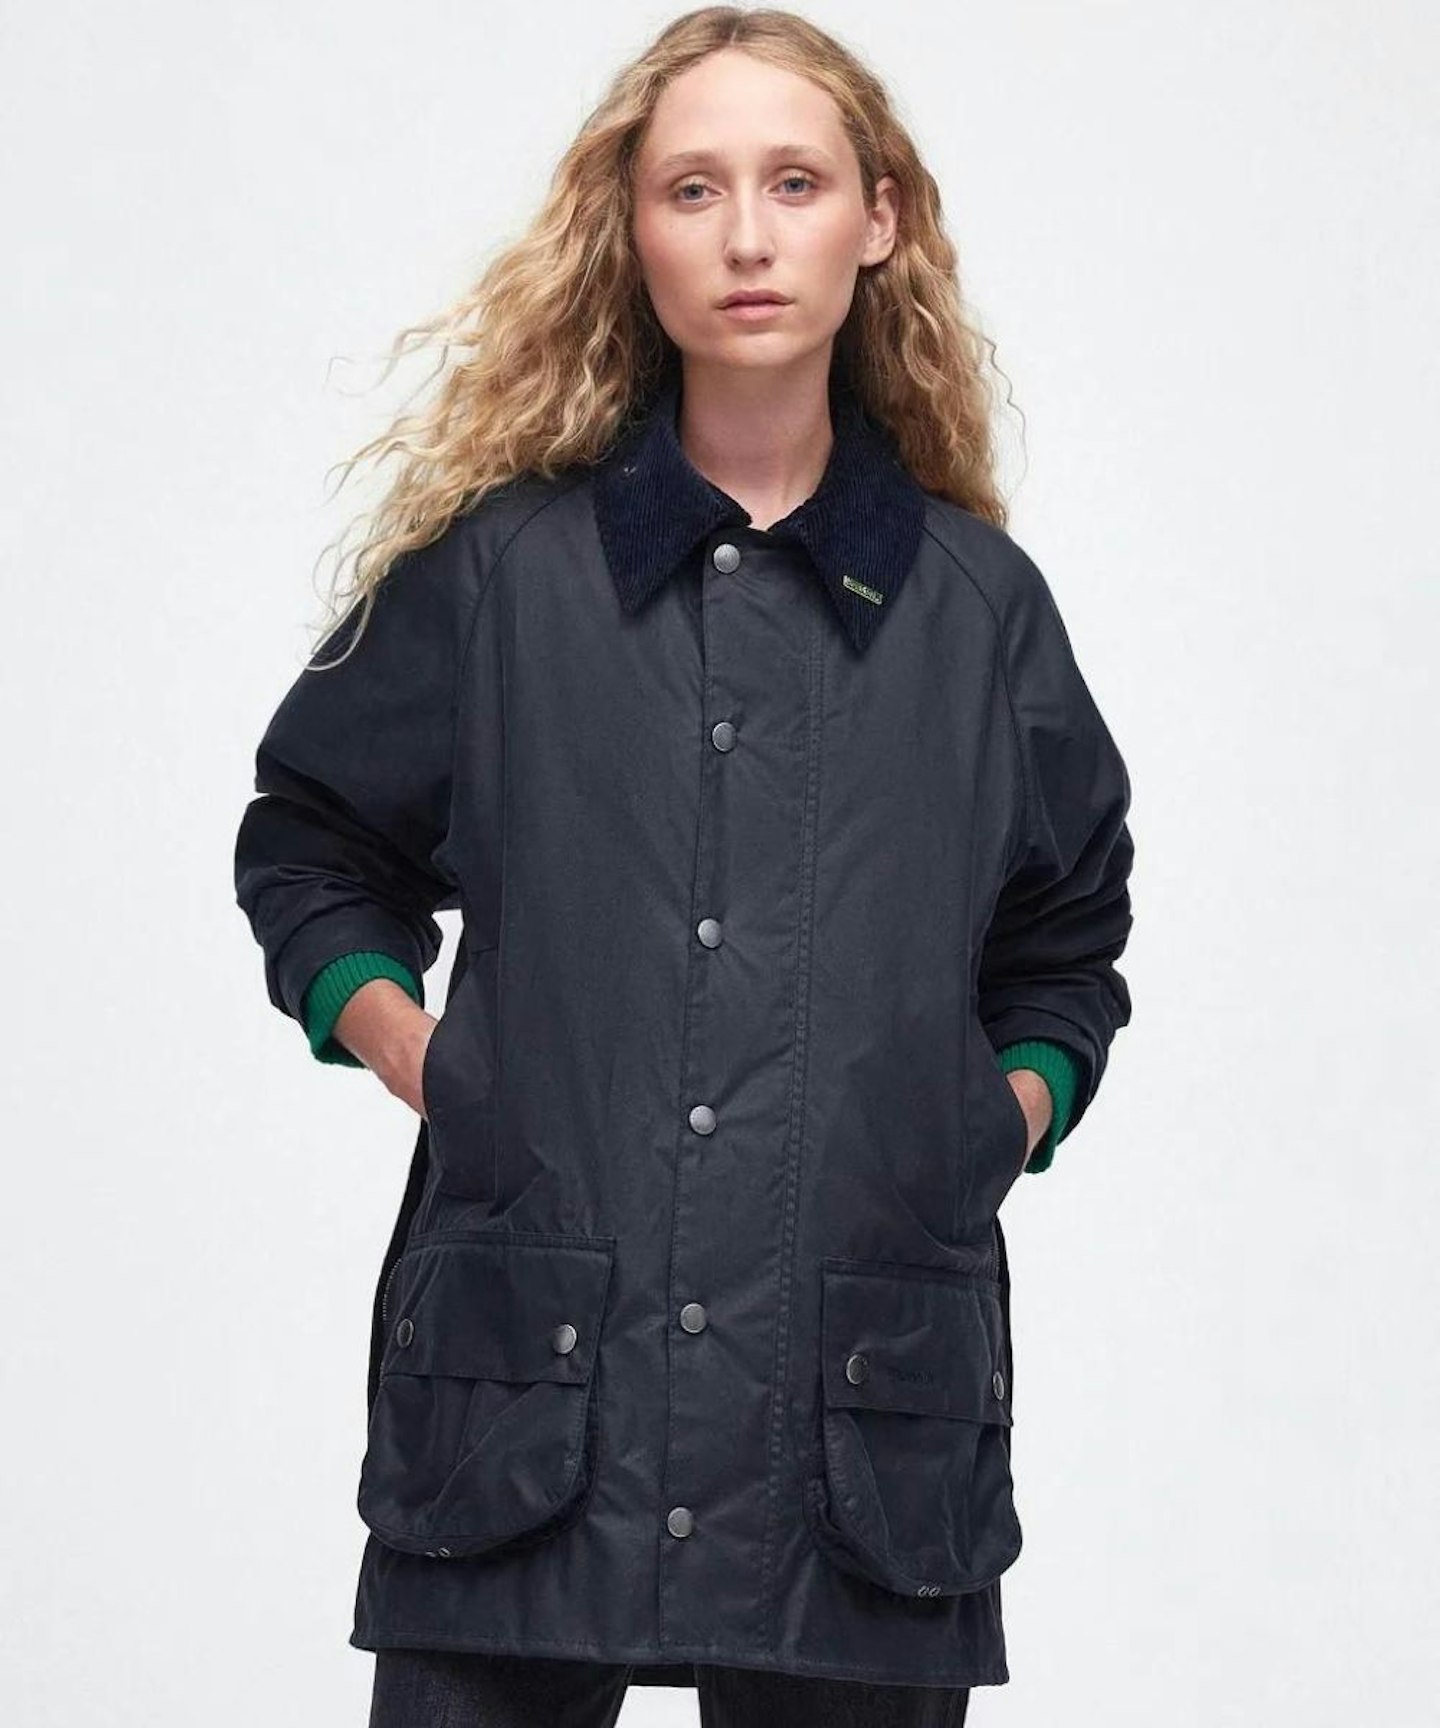 Barbour Have Just Released A Limited-Edition Of Their Most Popular ...